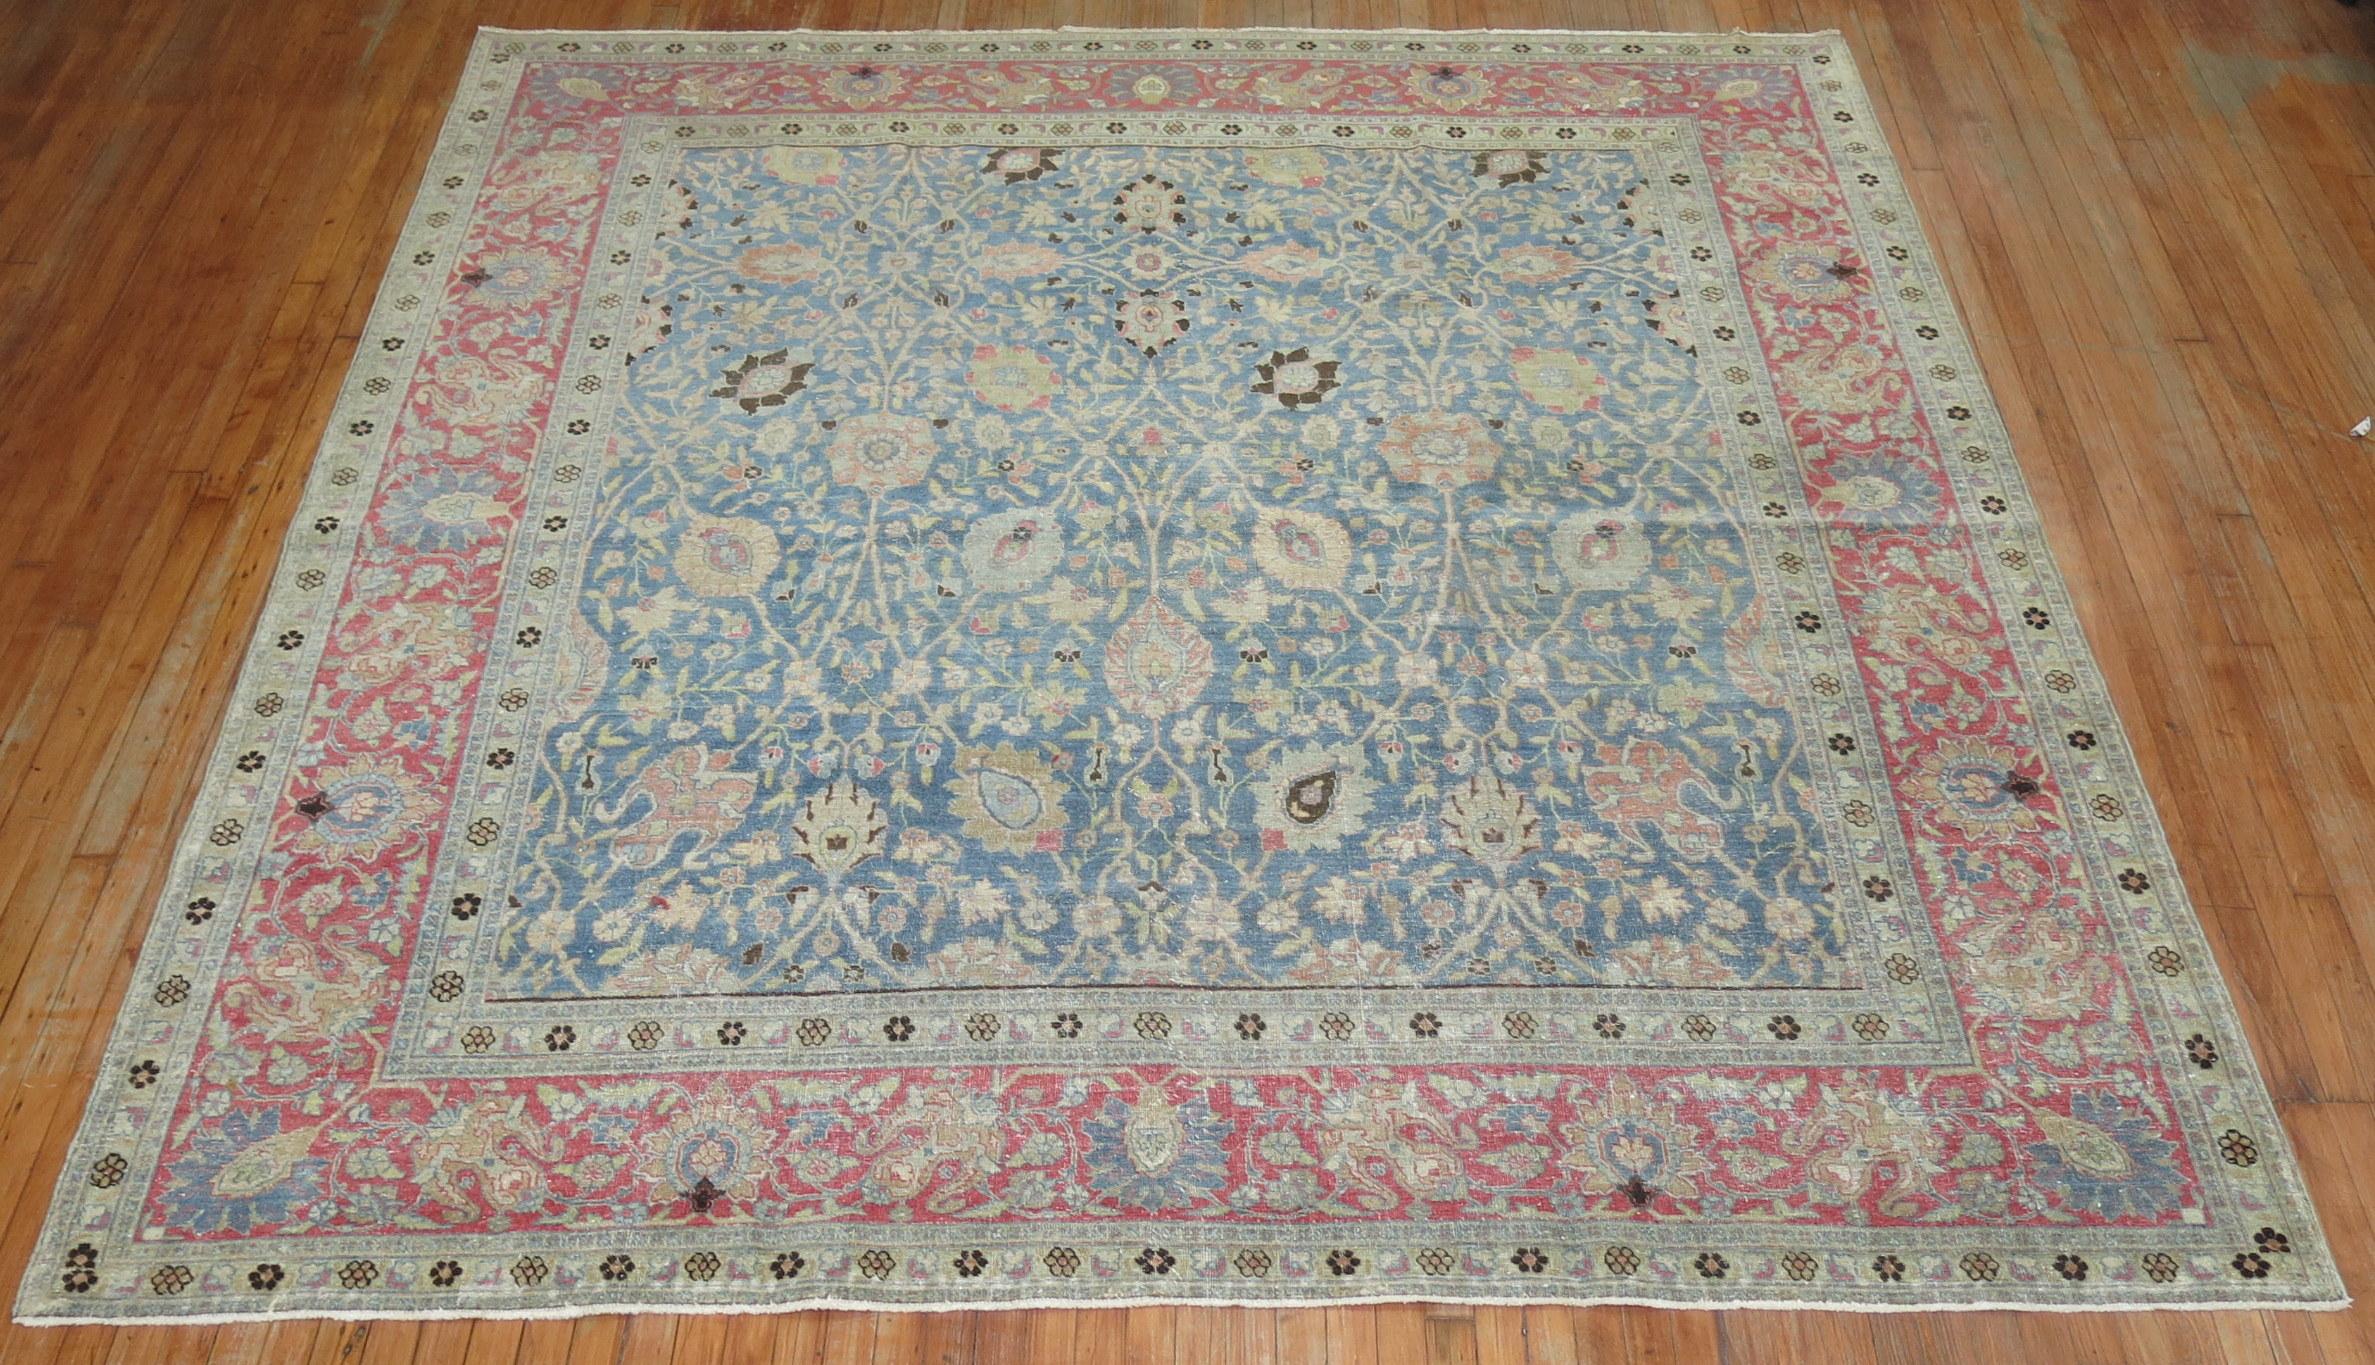 20th Century Square Antique Persian Tabriz Rug in Blues and Pink